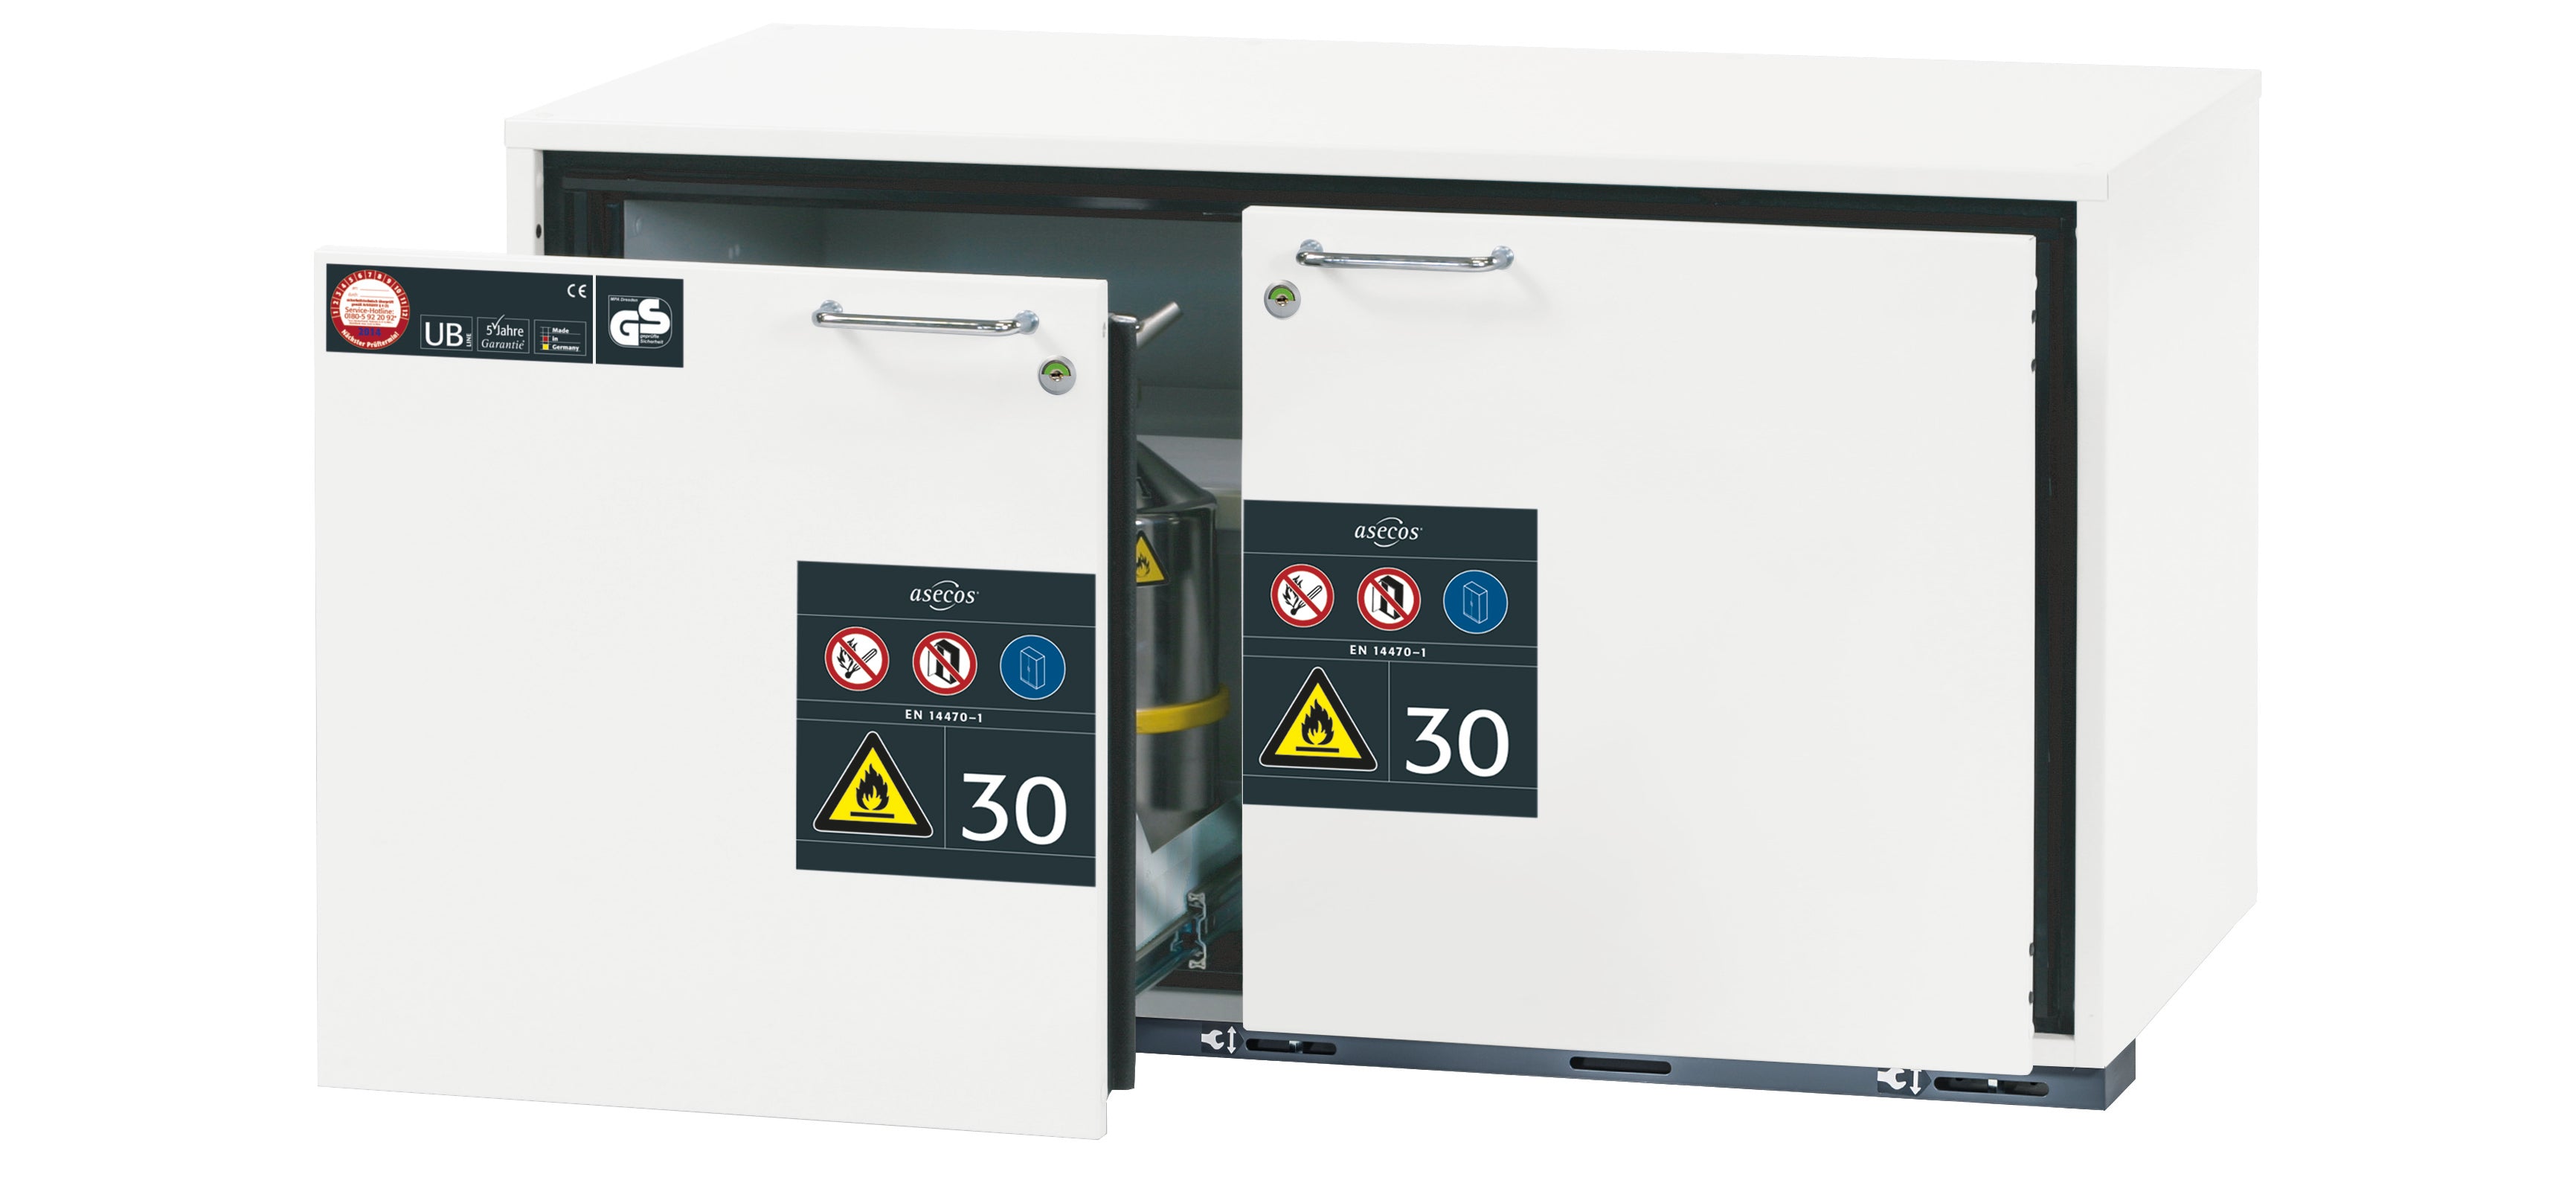 Type 30 safety base cabinet UB-S-30 model UB30.060.110.2S in laboratory white (similar to RAL 9016) with 2x drawer tray STAWA-R (stainless steel 1.4301)